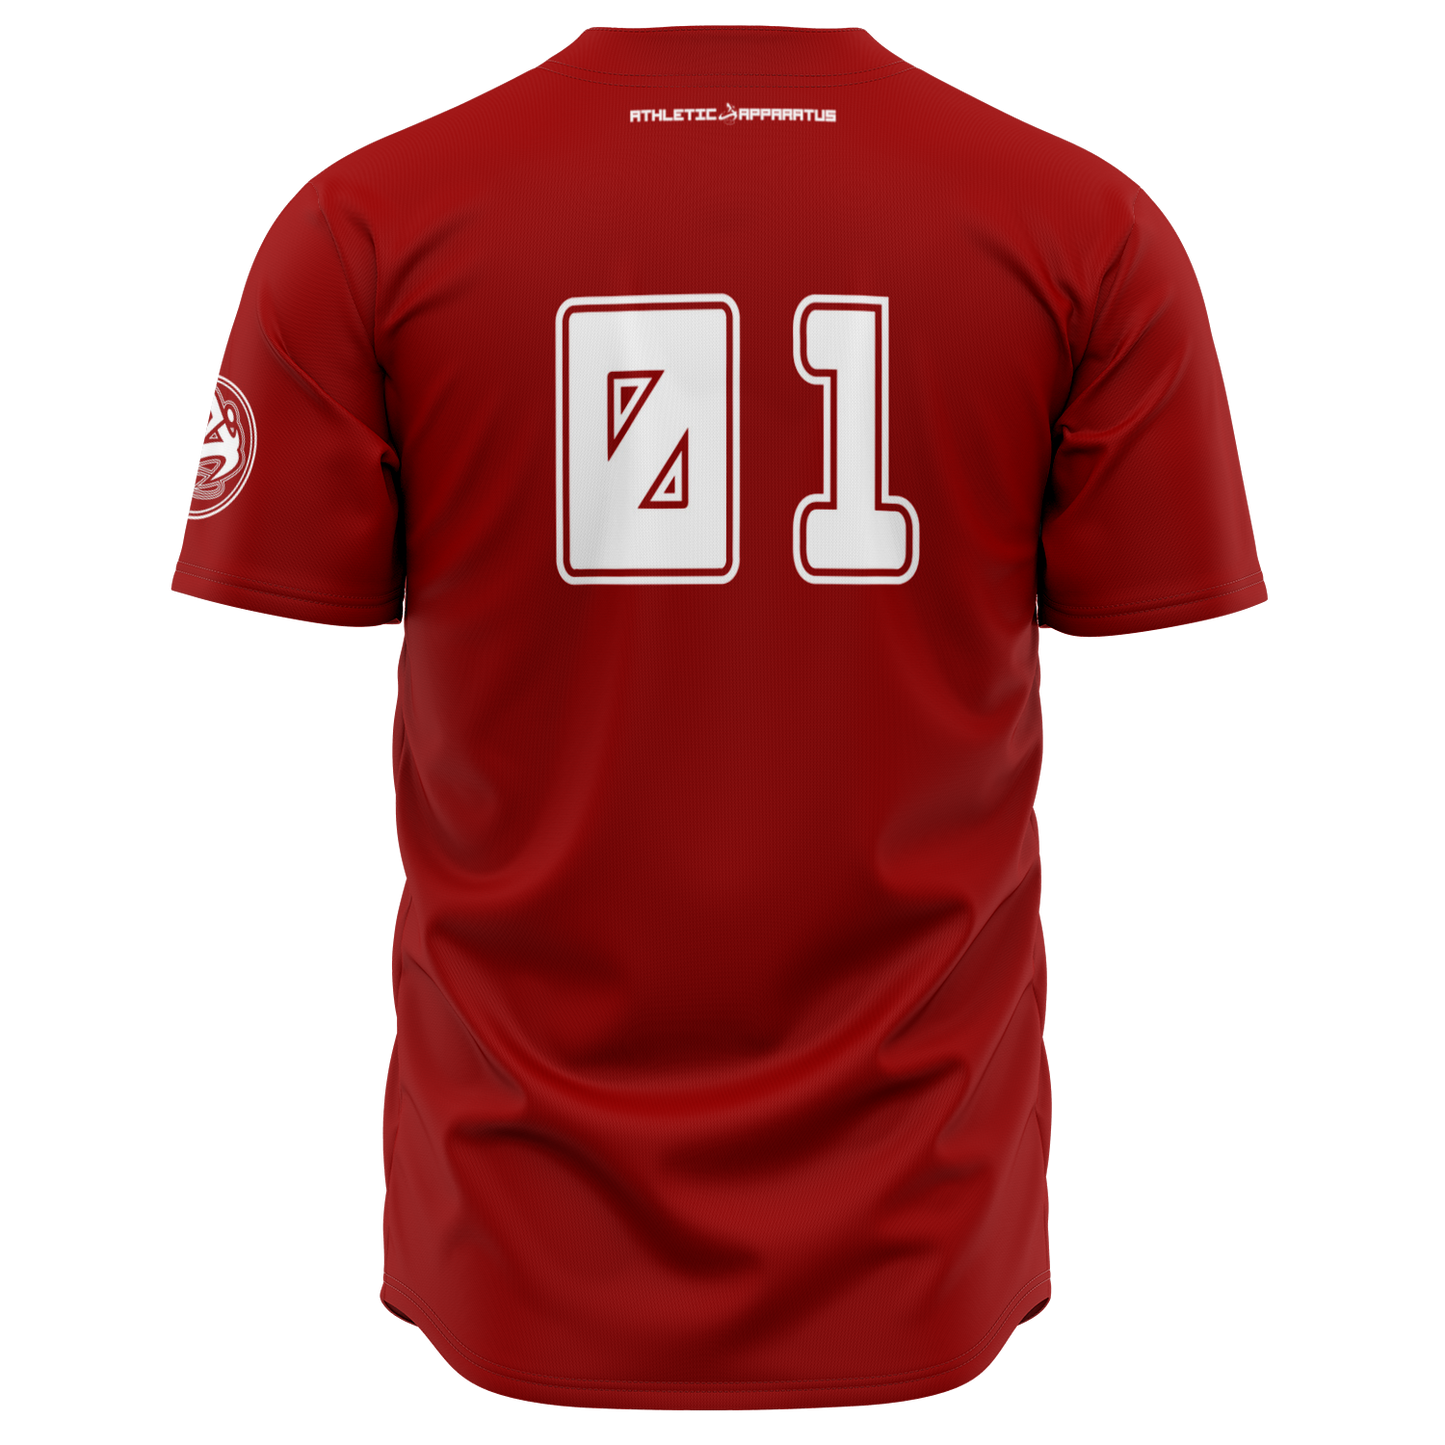 ATHLETIC APPARATUS WL RED E2 BASEBALL JERSEY - Athletic Apparatus